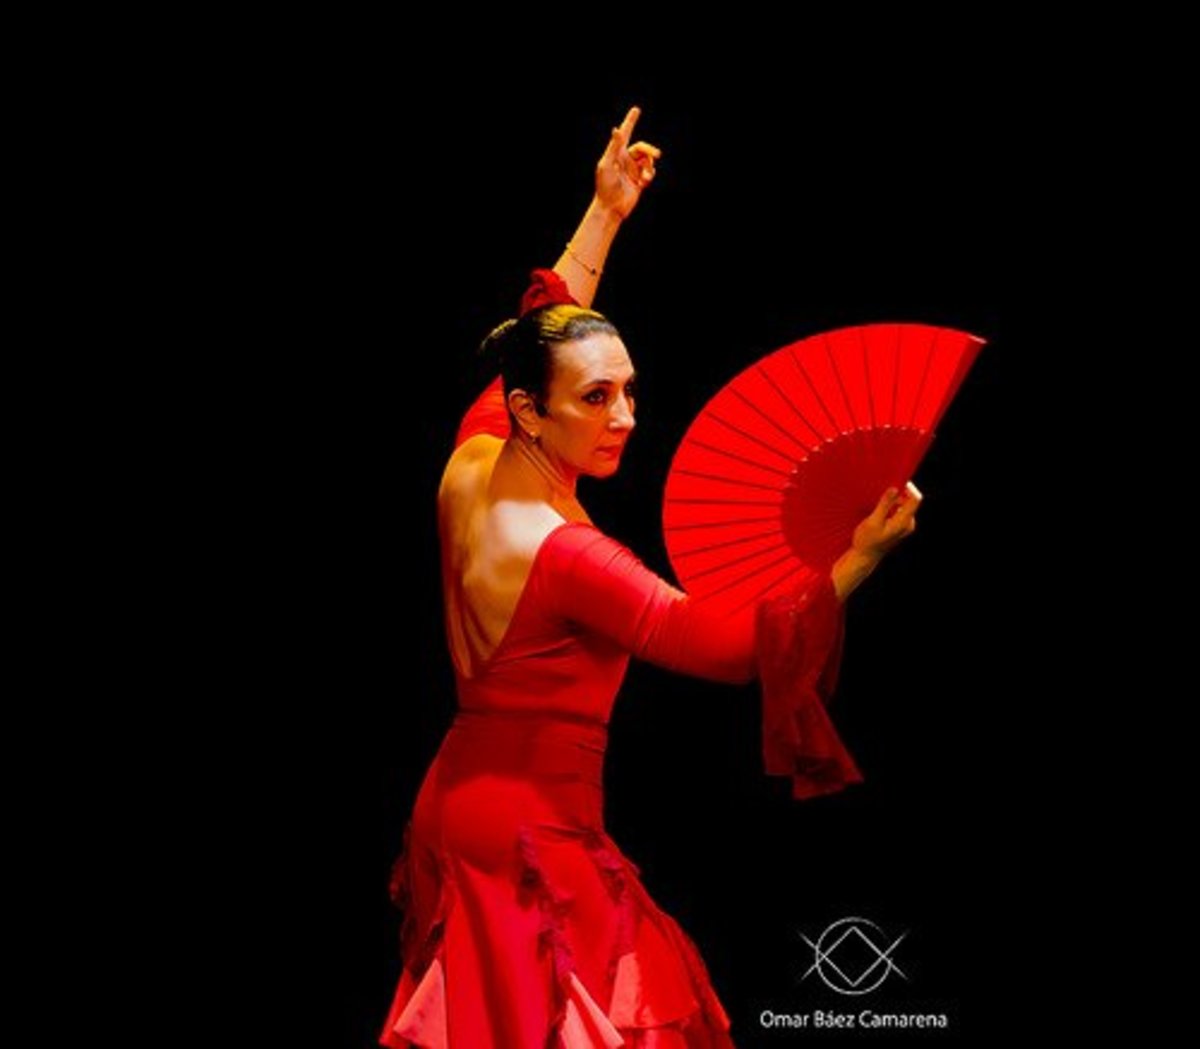 The Spanish ‘abanico’ or fan is also an integral part of the flamenco style. 